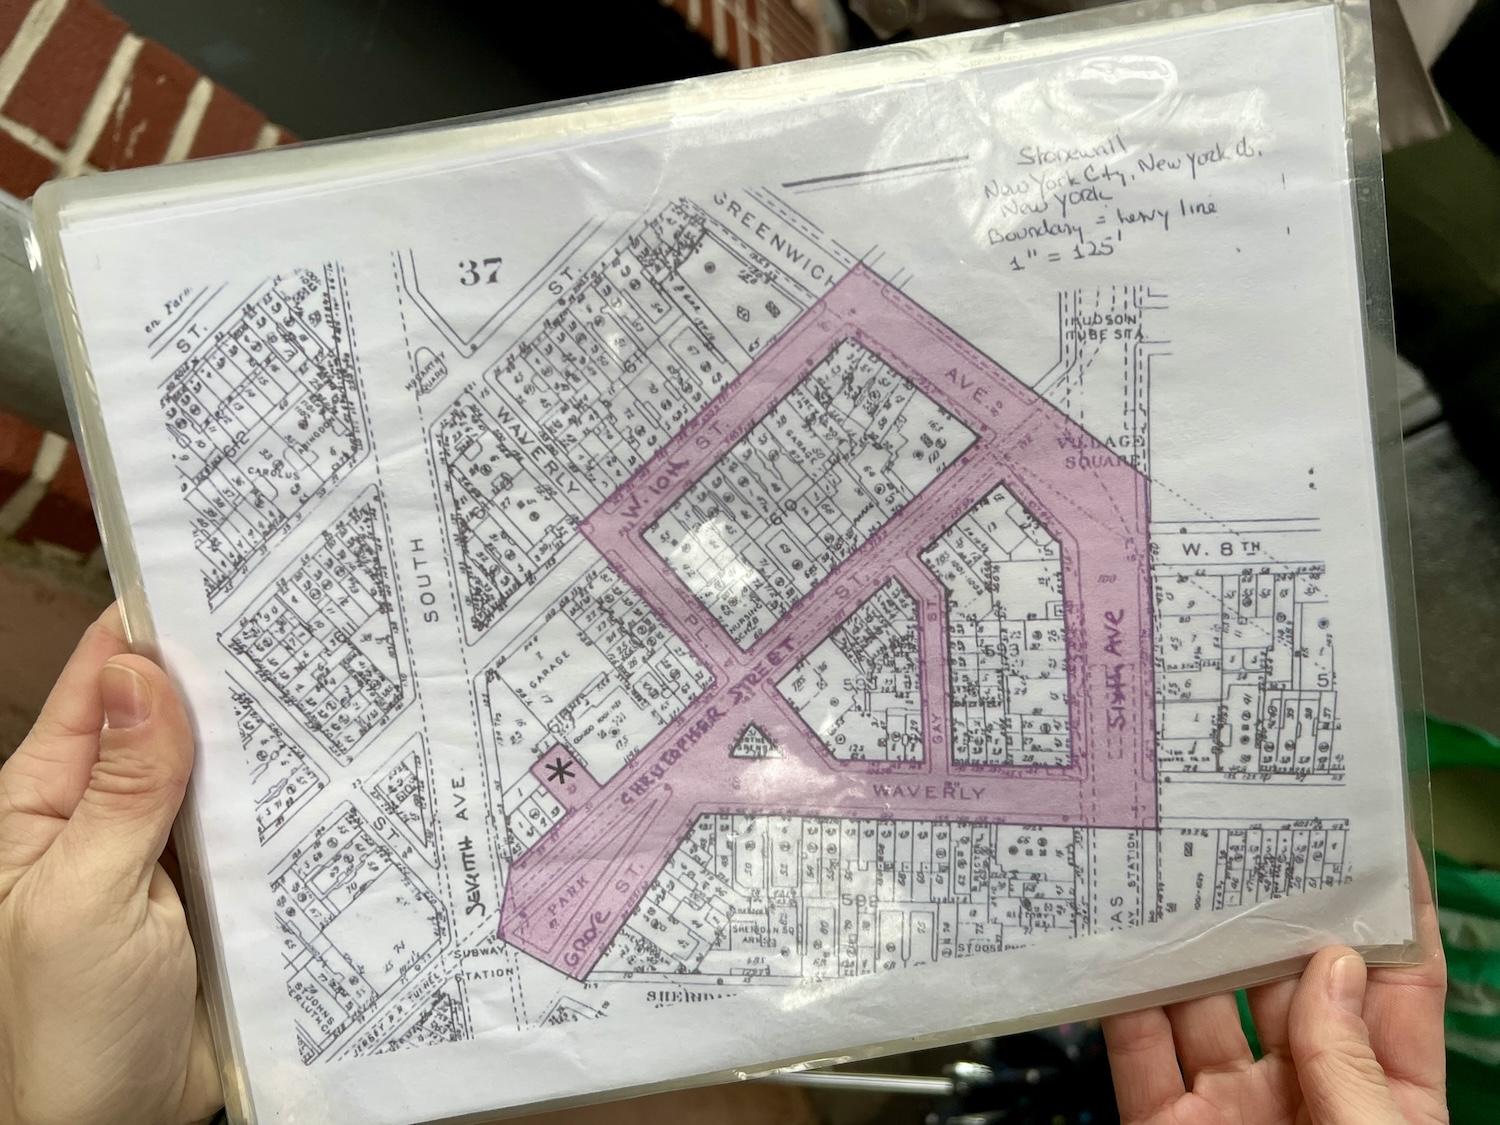 Stonewall National Monument lead ranger Julie Burna shows the laminated map she uses to show tours the area of Greenwich Village that is federally protected and can be interpreted.